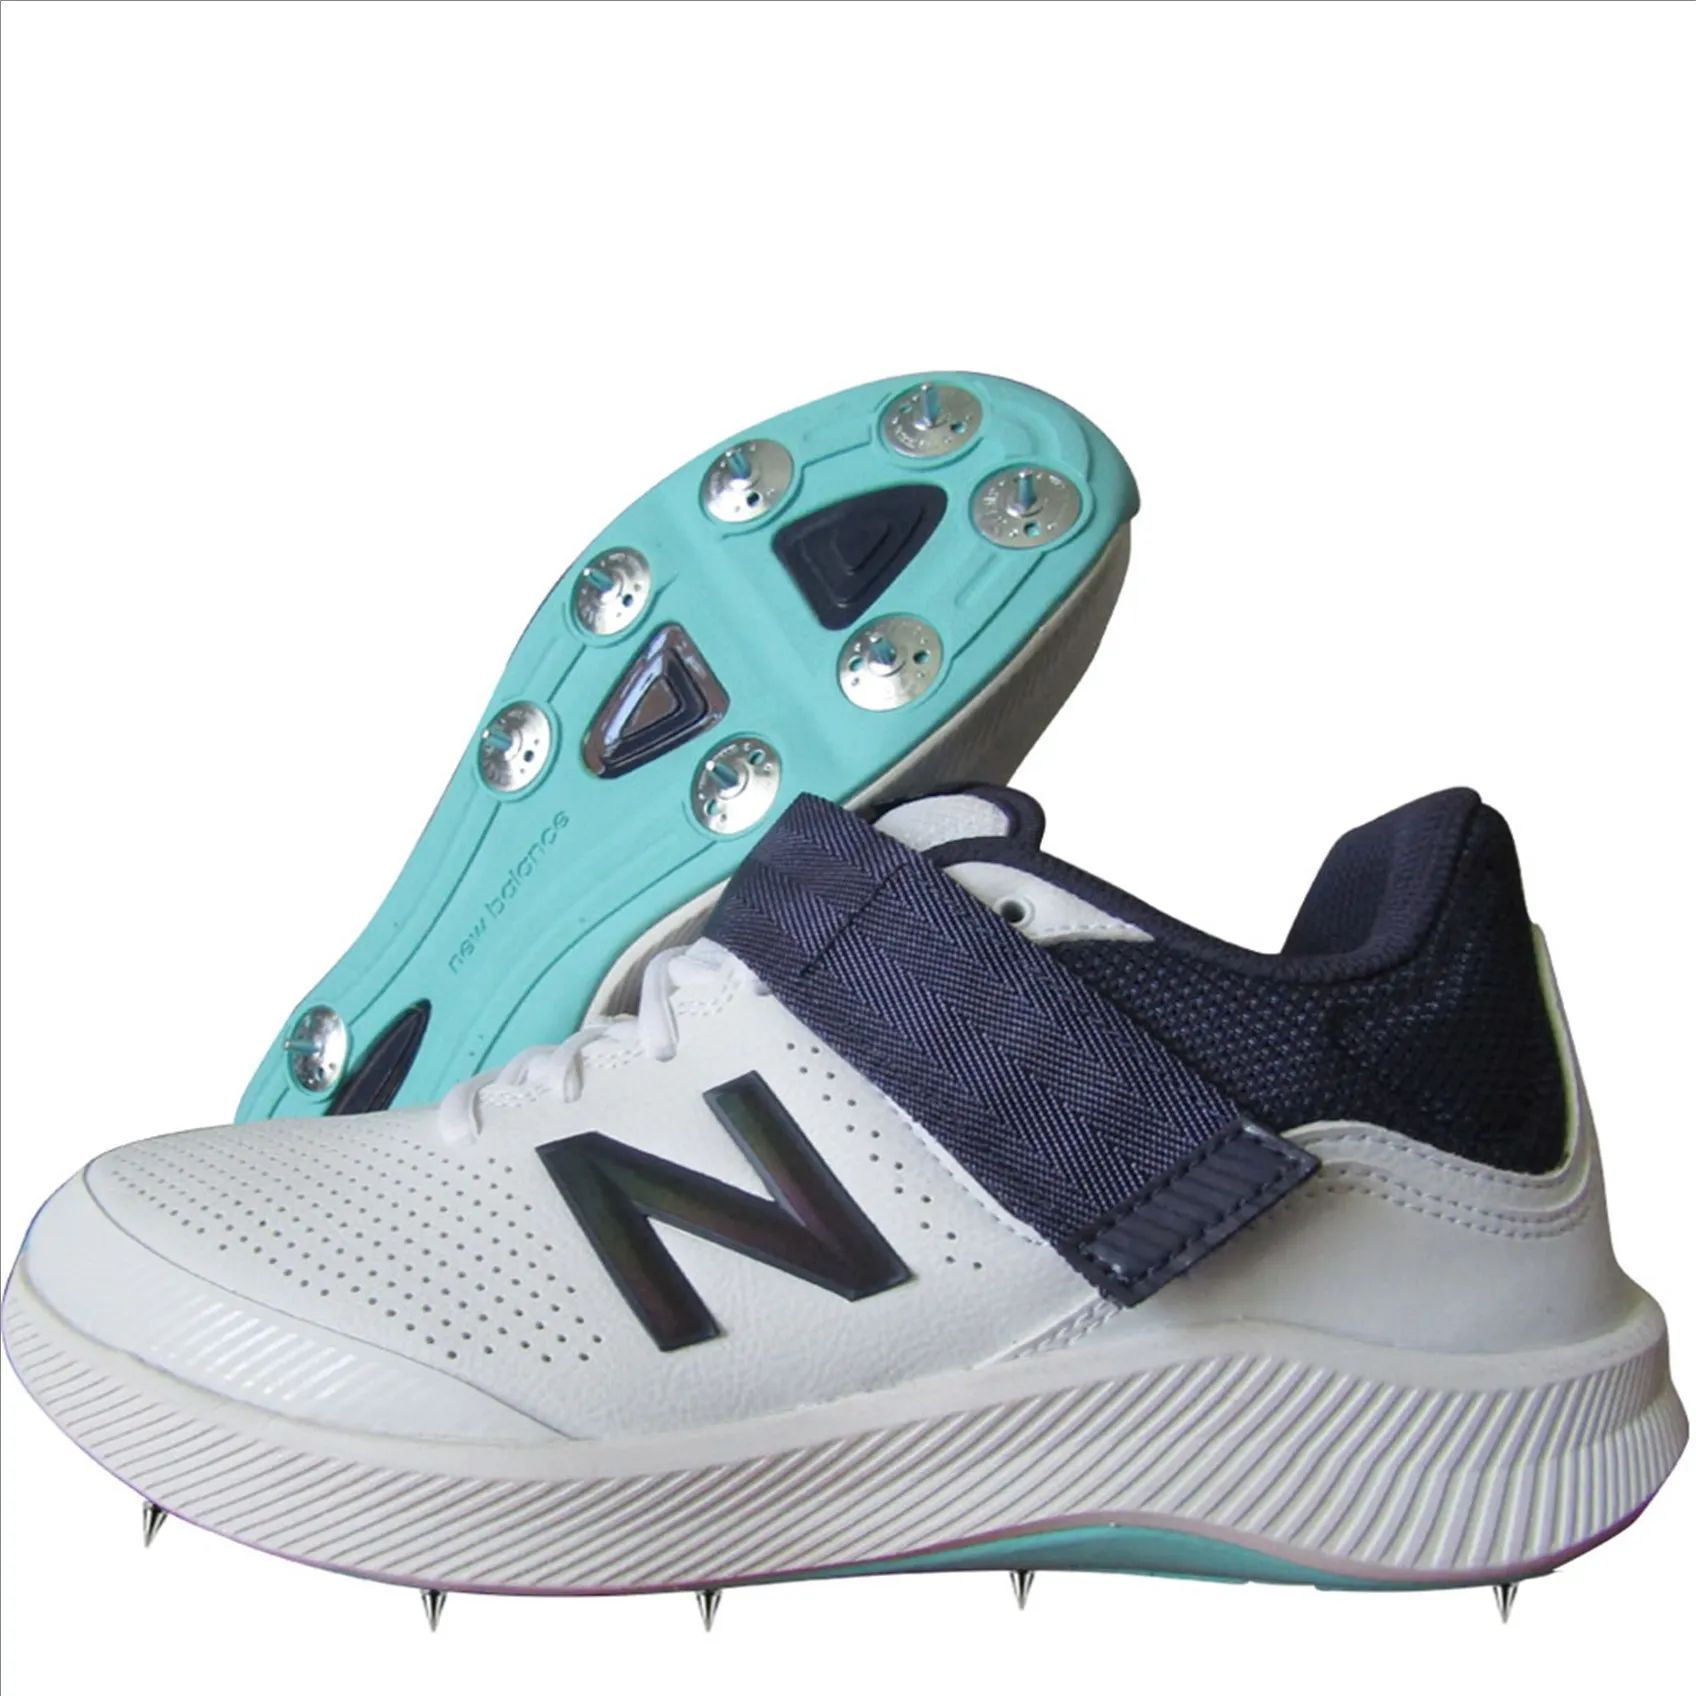 New Balance CK4040 J5 Spike Cricket Shoes White Cyber Jade,- Buy New Balance  CK4040 J5 Spike Cricket Shoes White Cyber Jade Online at Lowest Prices in  India - | khelmart.com